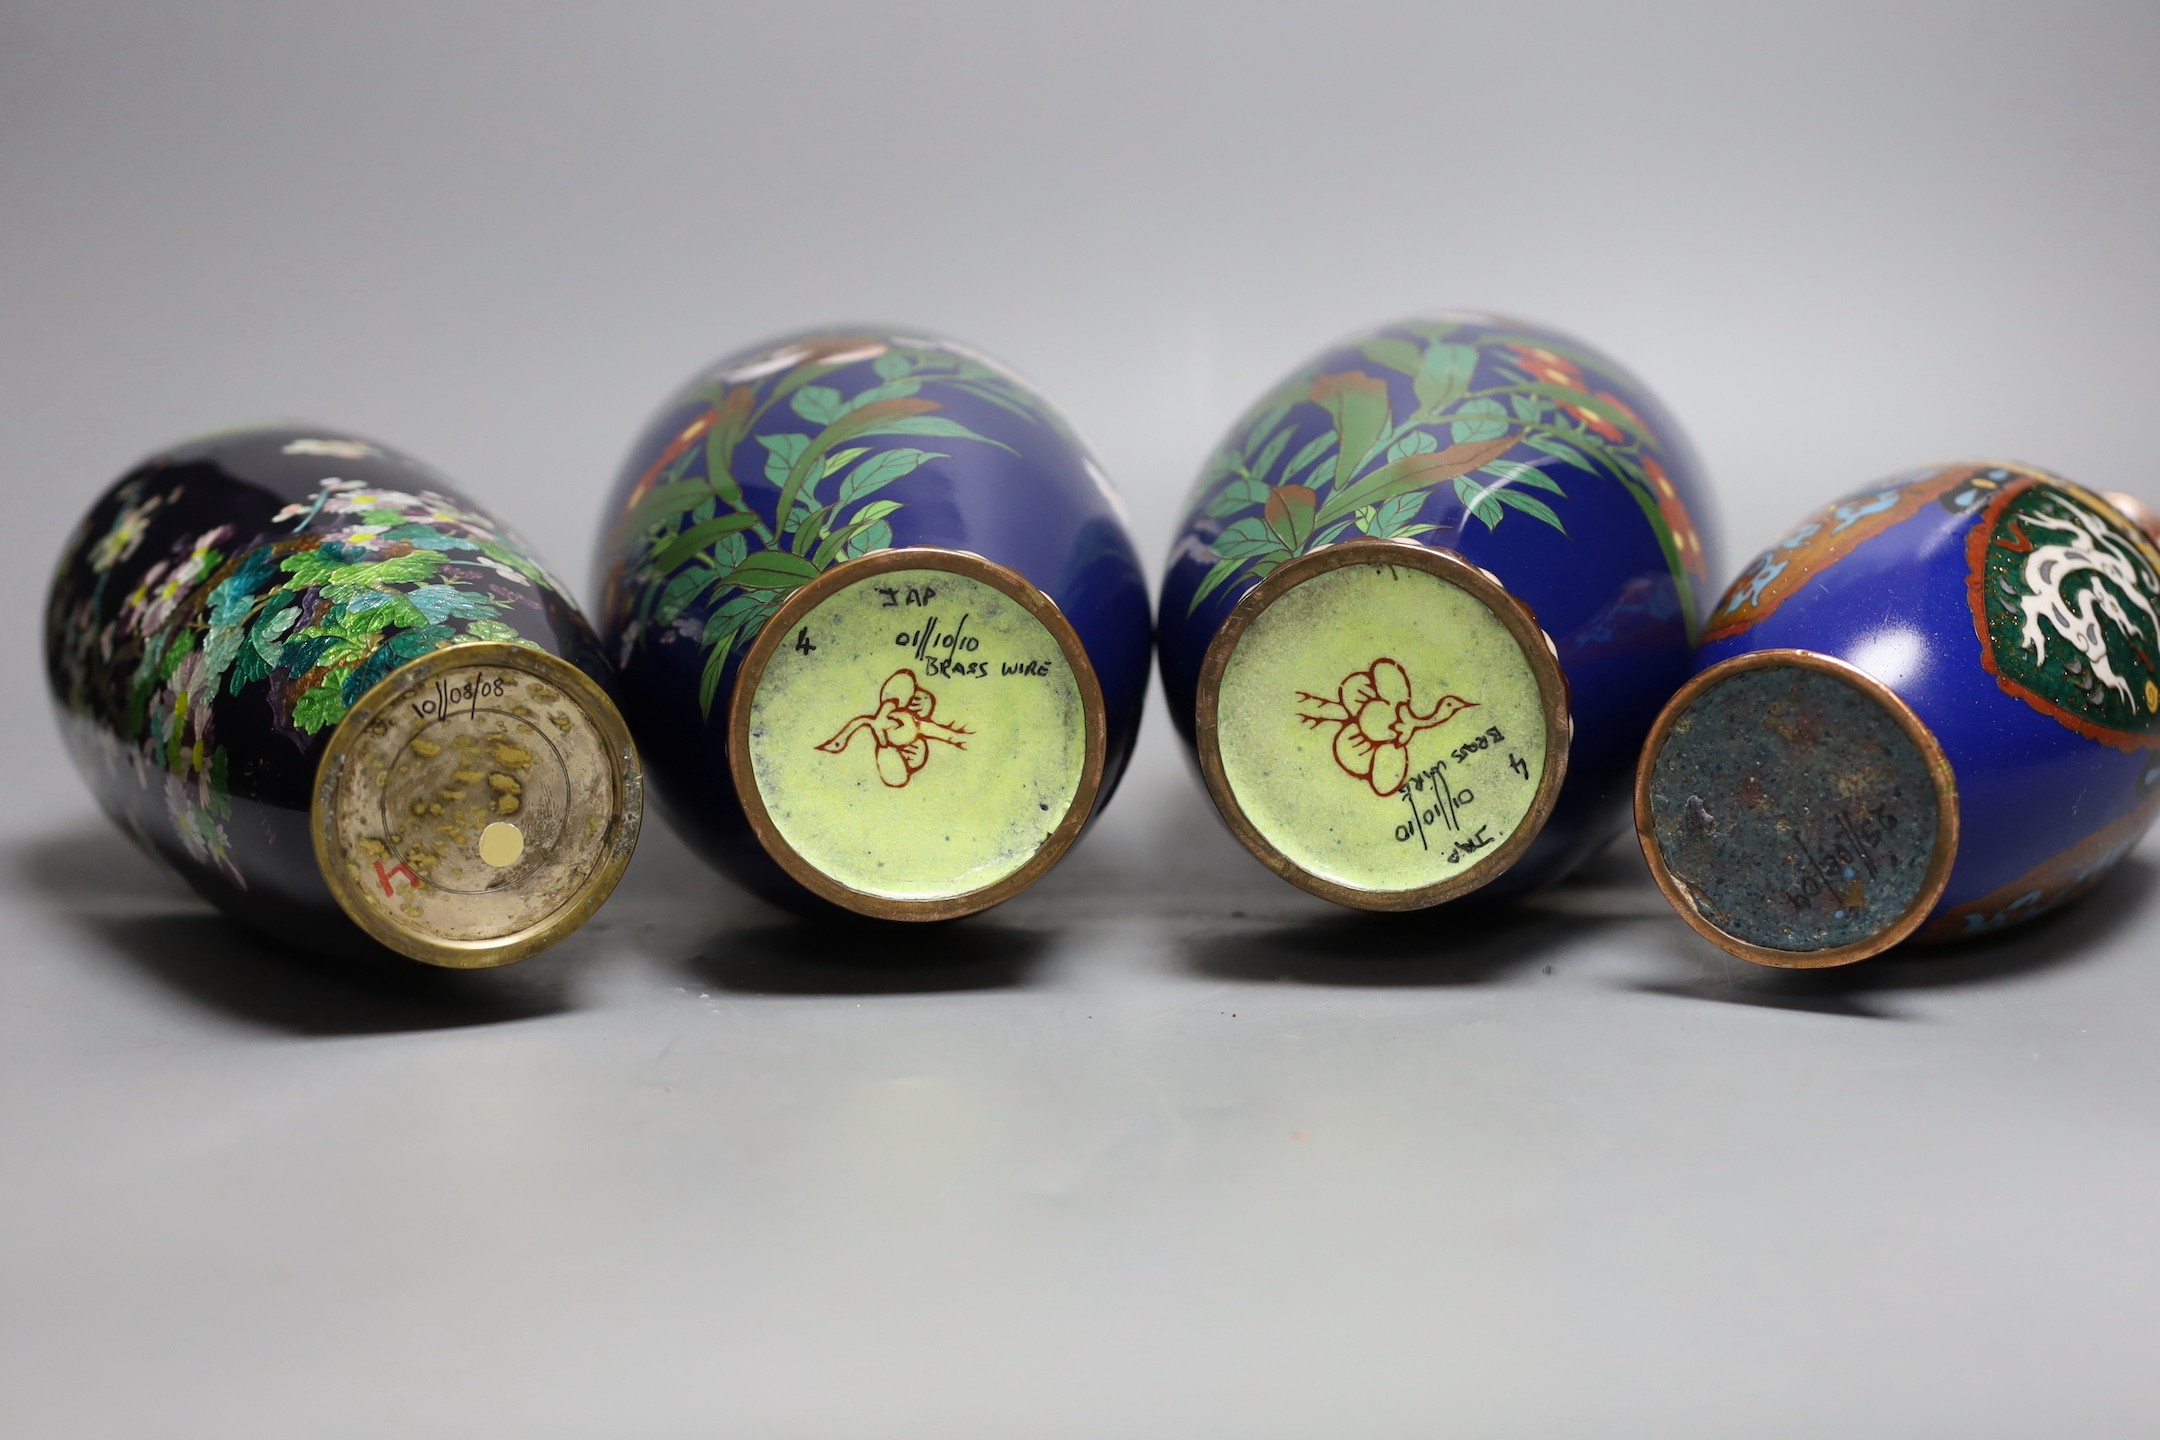 A group of Japanese cloisonné enamel wares to include a pair of vases, two other vases and a dish, Meiji period